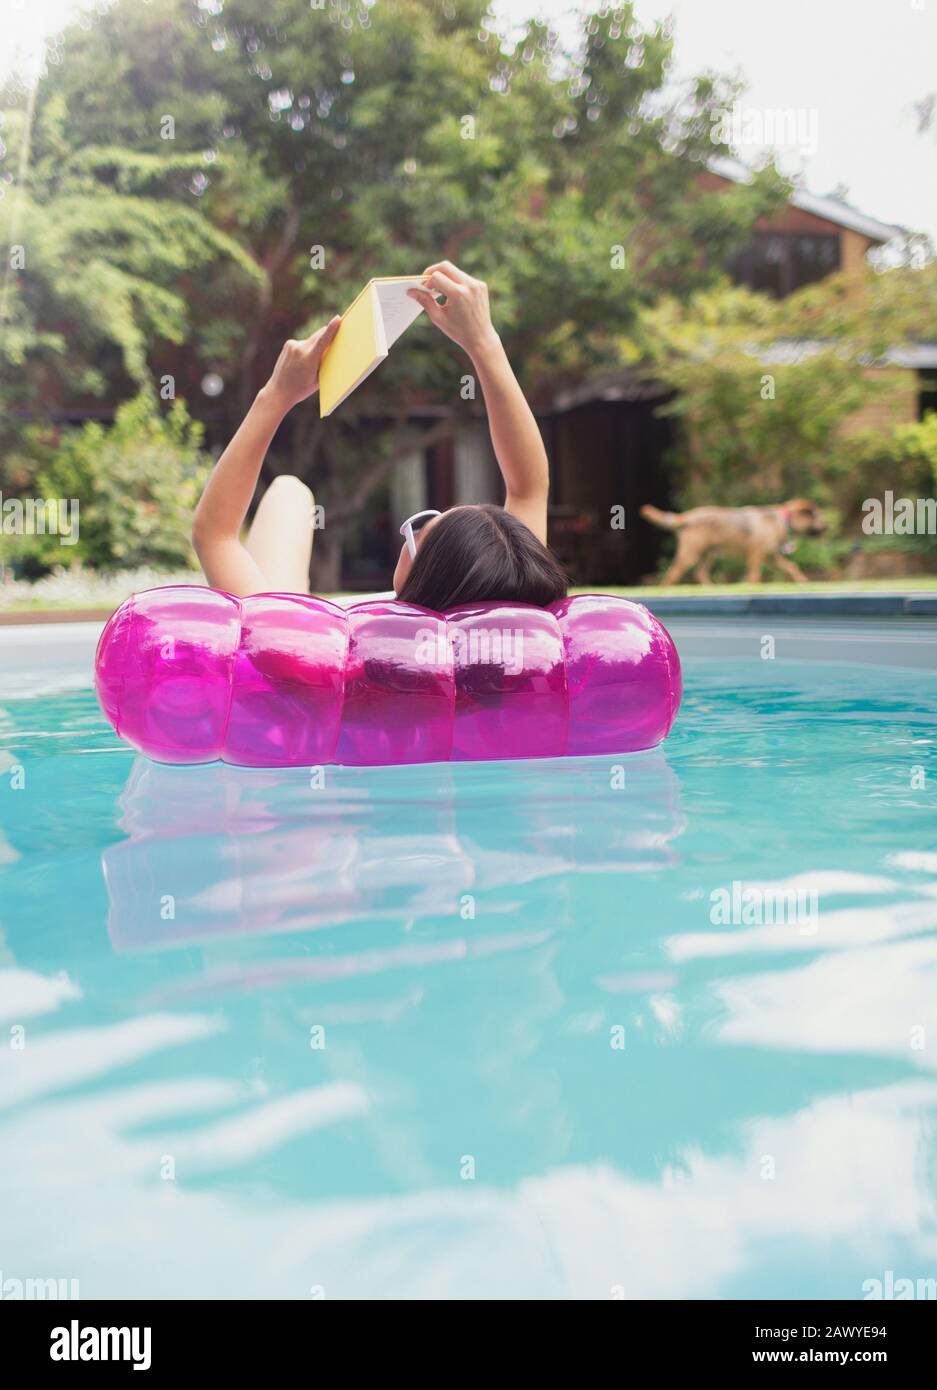 Woman relaxing, reading book on inflatable raft in sunny summer swimming pool Stock Photo